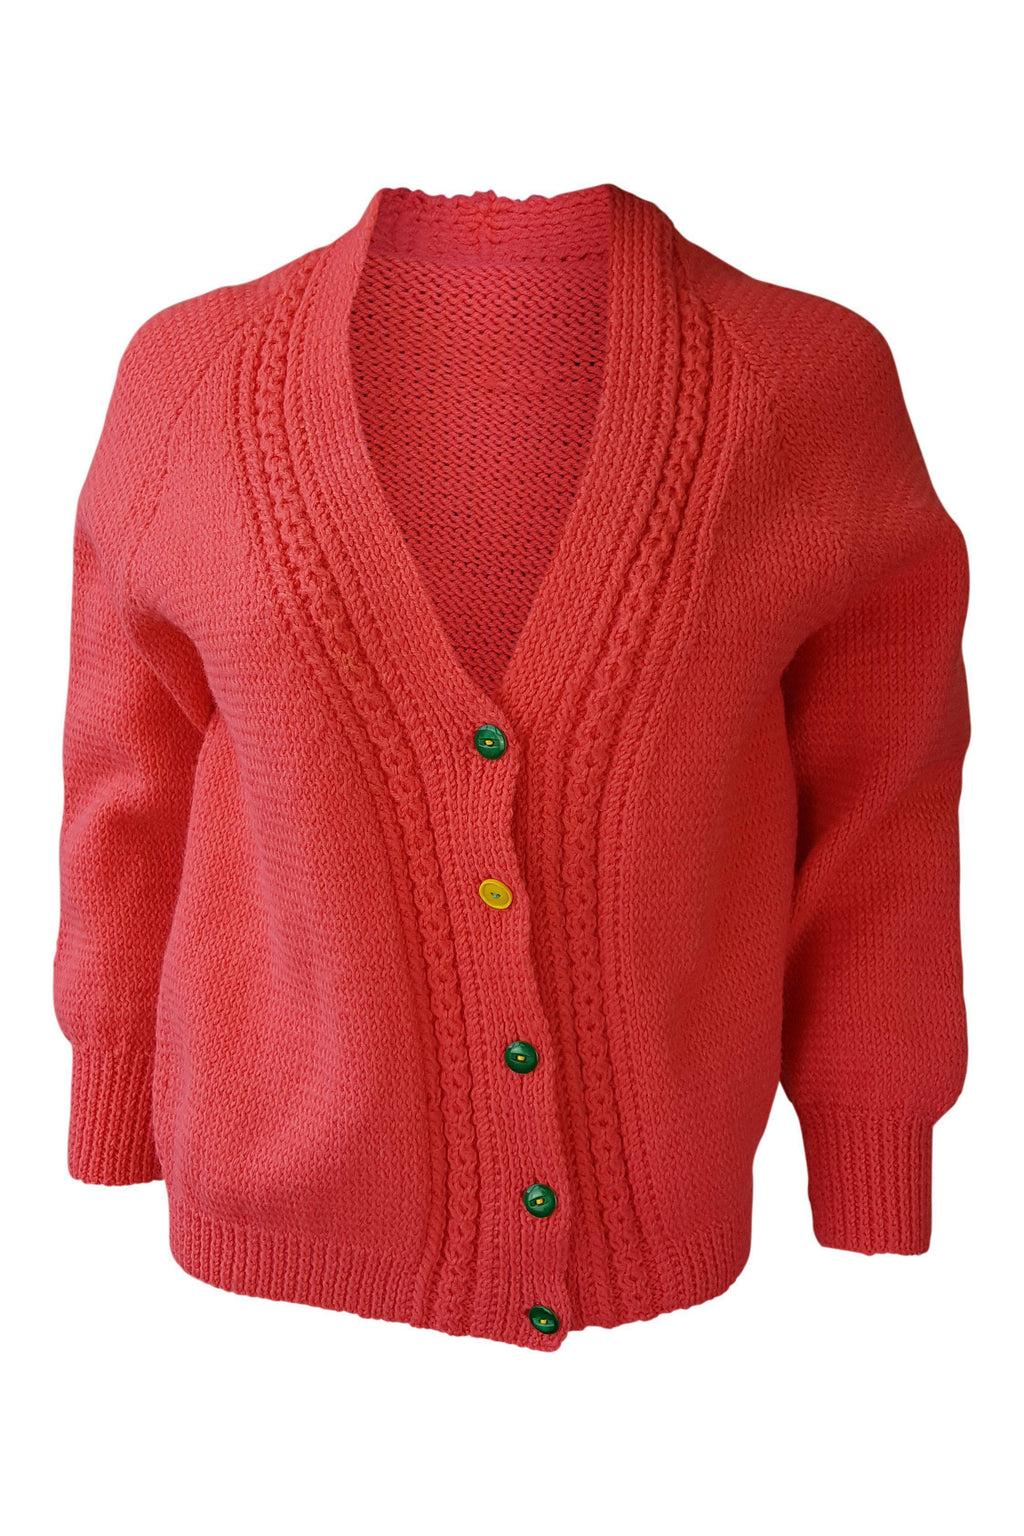 UNBRANDED Vintage Pink Cardigan (M)-The Freperie-The Freperie